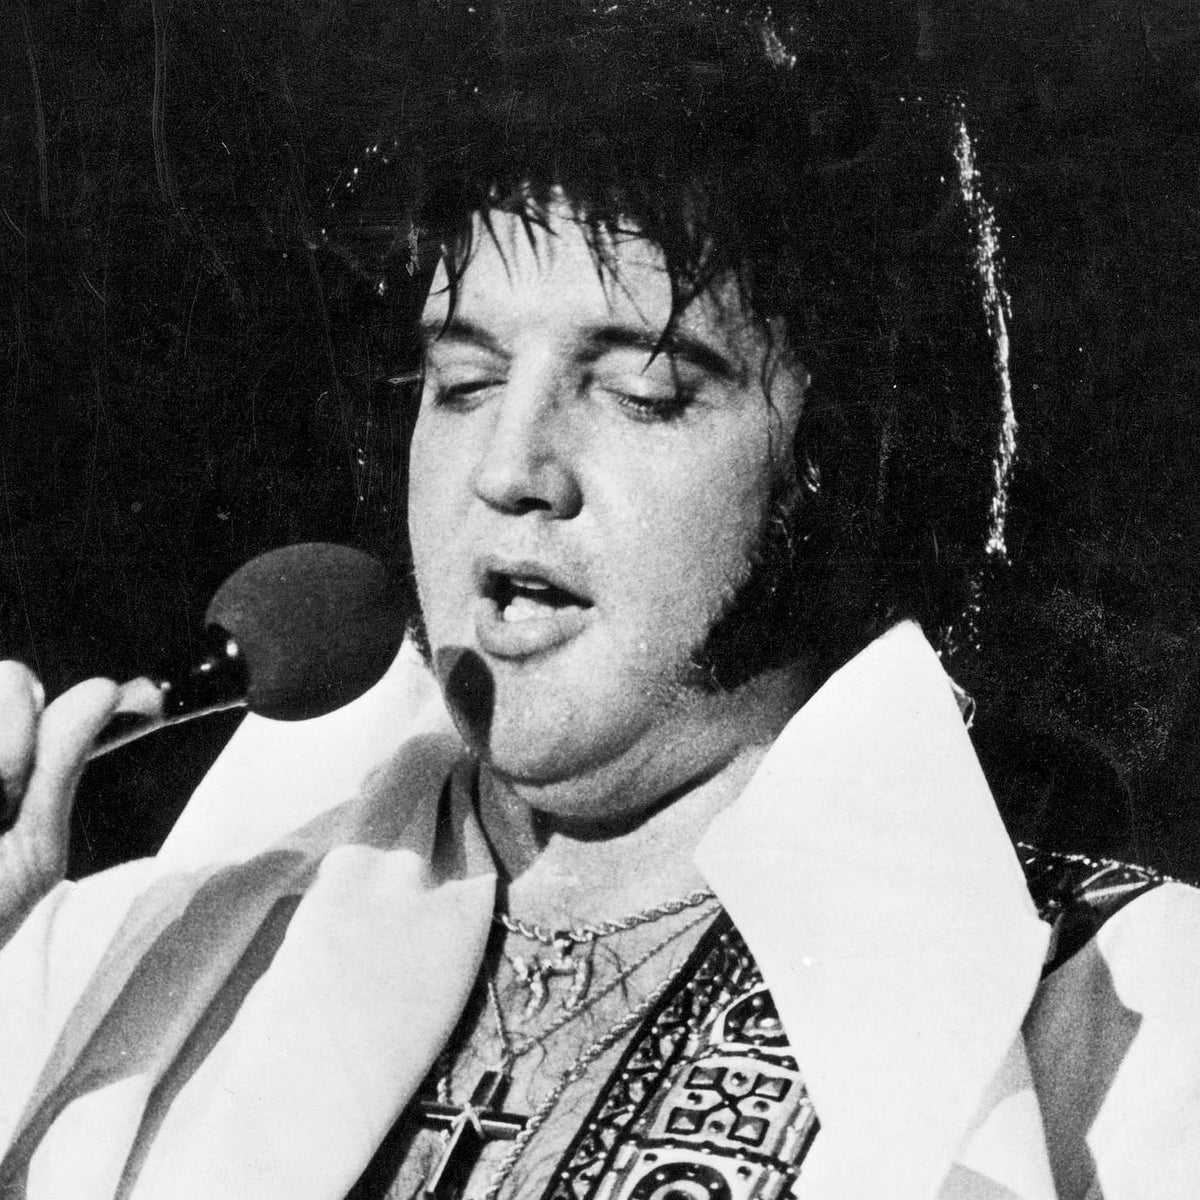 Was Elvis Presley destined to die early? DNA tests show King was prone to  obesity and disease, The Independent